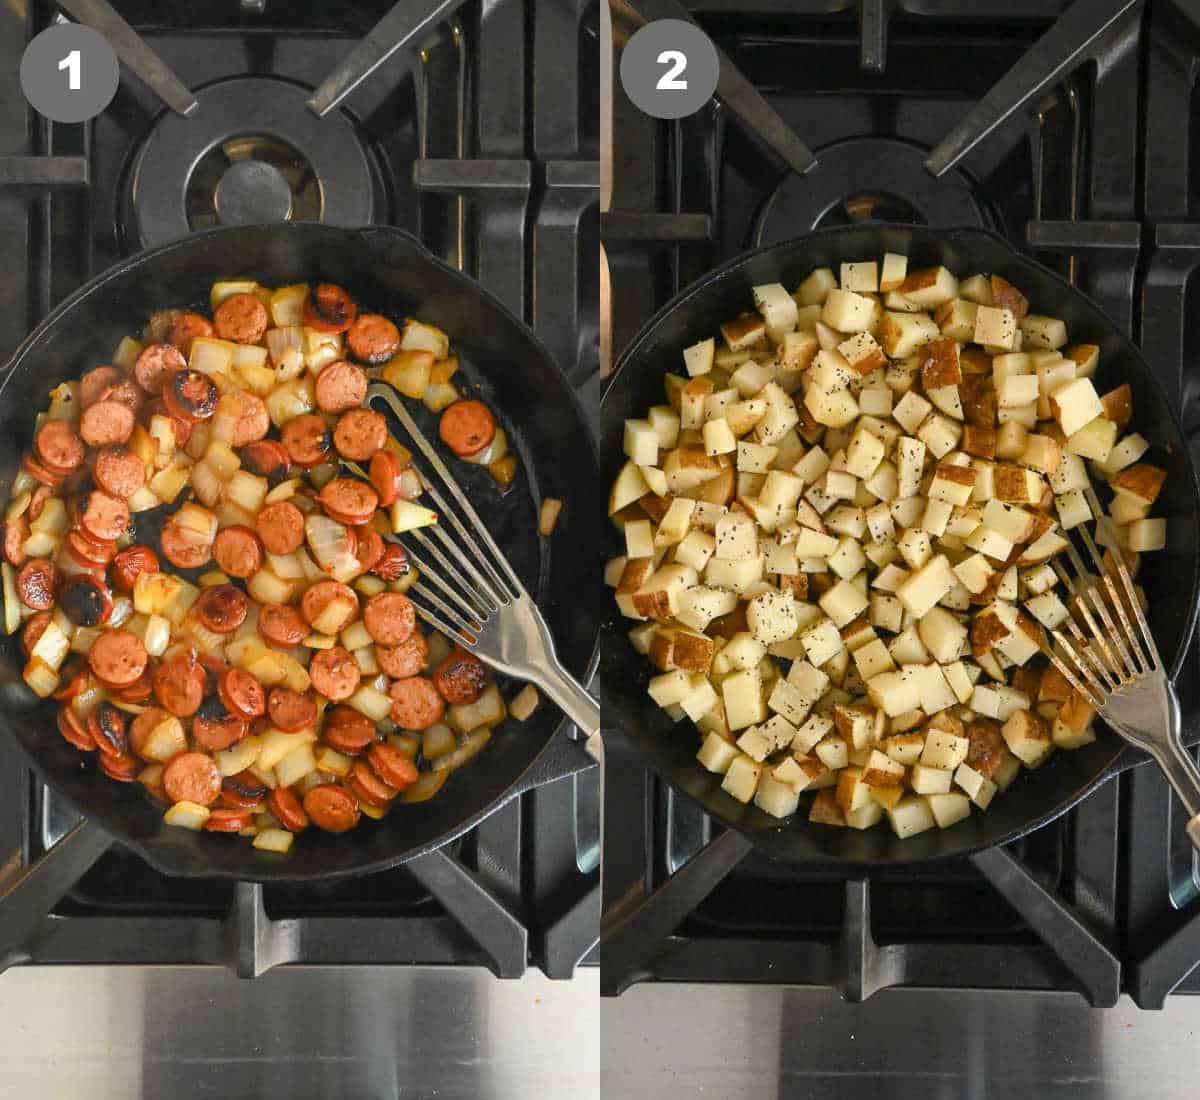 Sausages fried in a skillet then potatoes added in.